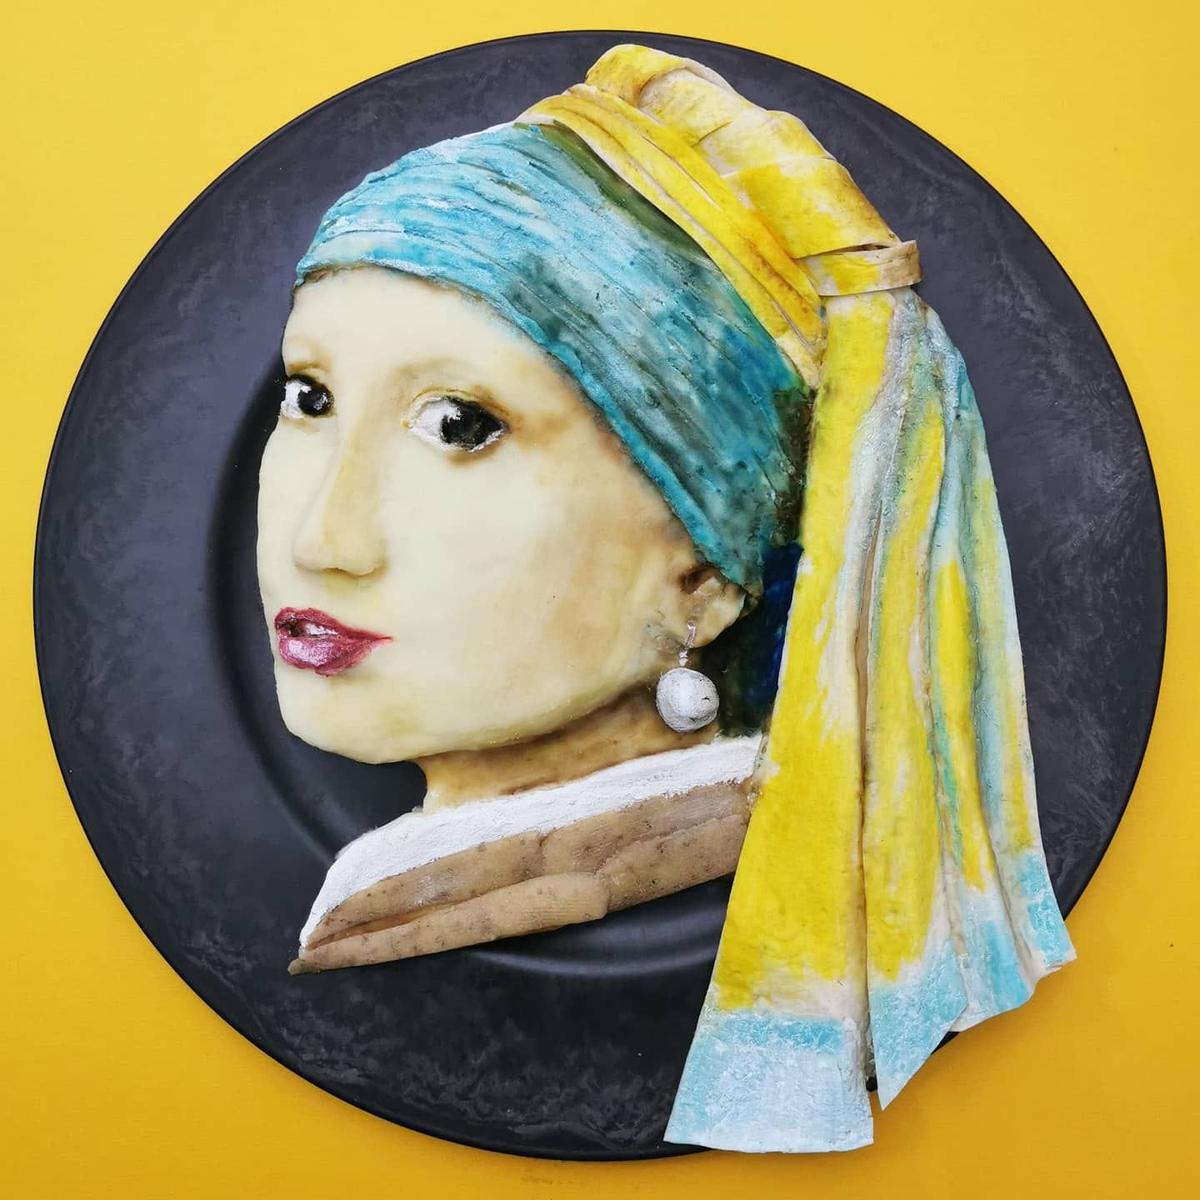 "A Girl With the Pearl Earring" made from creamy mashed potatoes and decorated with tortilla wraps, yogurt, curry powder, and food color. (Courtesy of <a href="https://www.instagram.com/demealprepper/">Jolanda Stokkermans</a>)